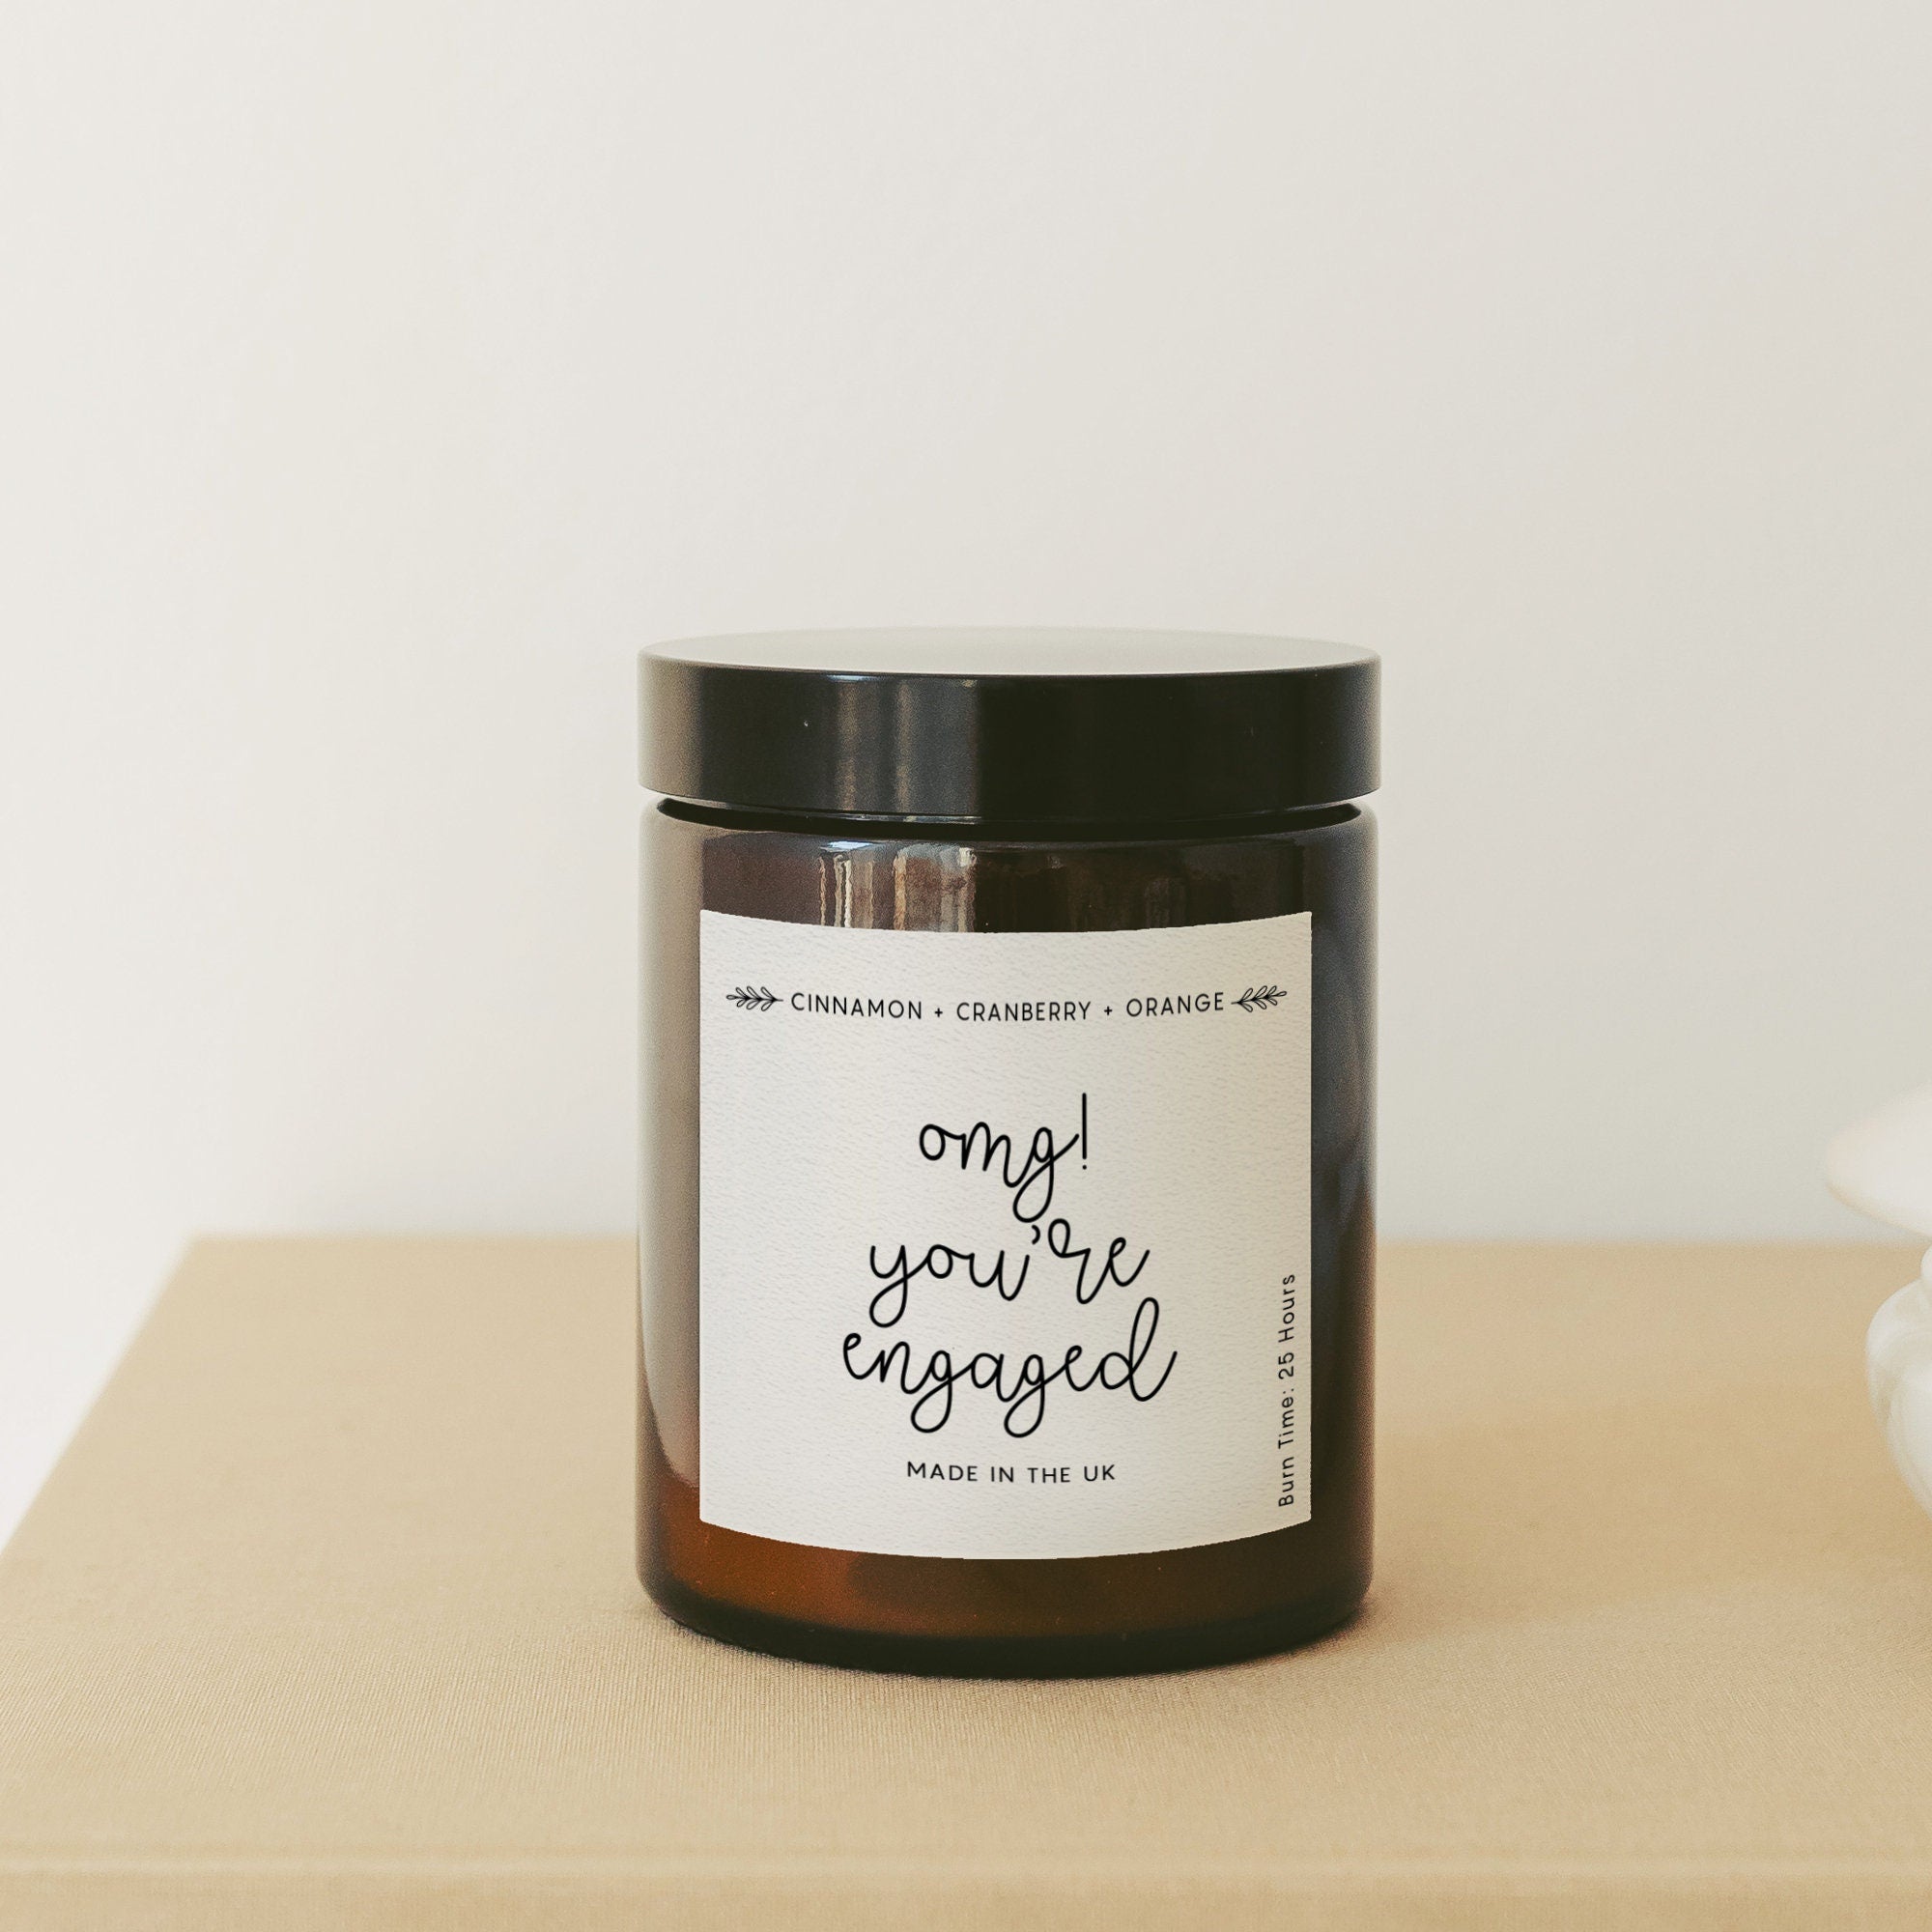 Omg! You'Re Engaged Candle, Engagement Gift, Mr Mrs Gift, Soy Wax Apothecary Scented Candle